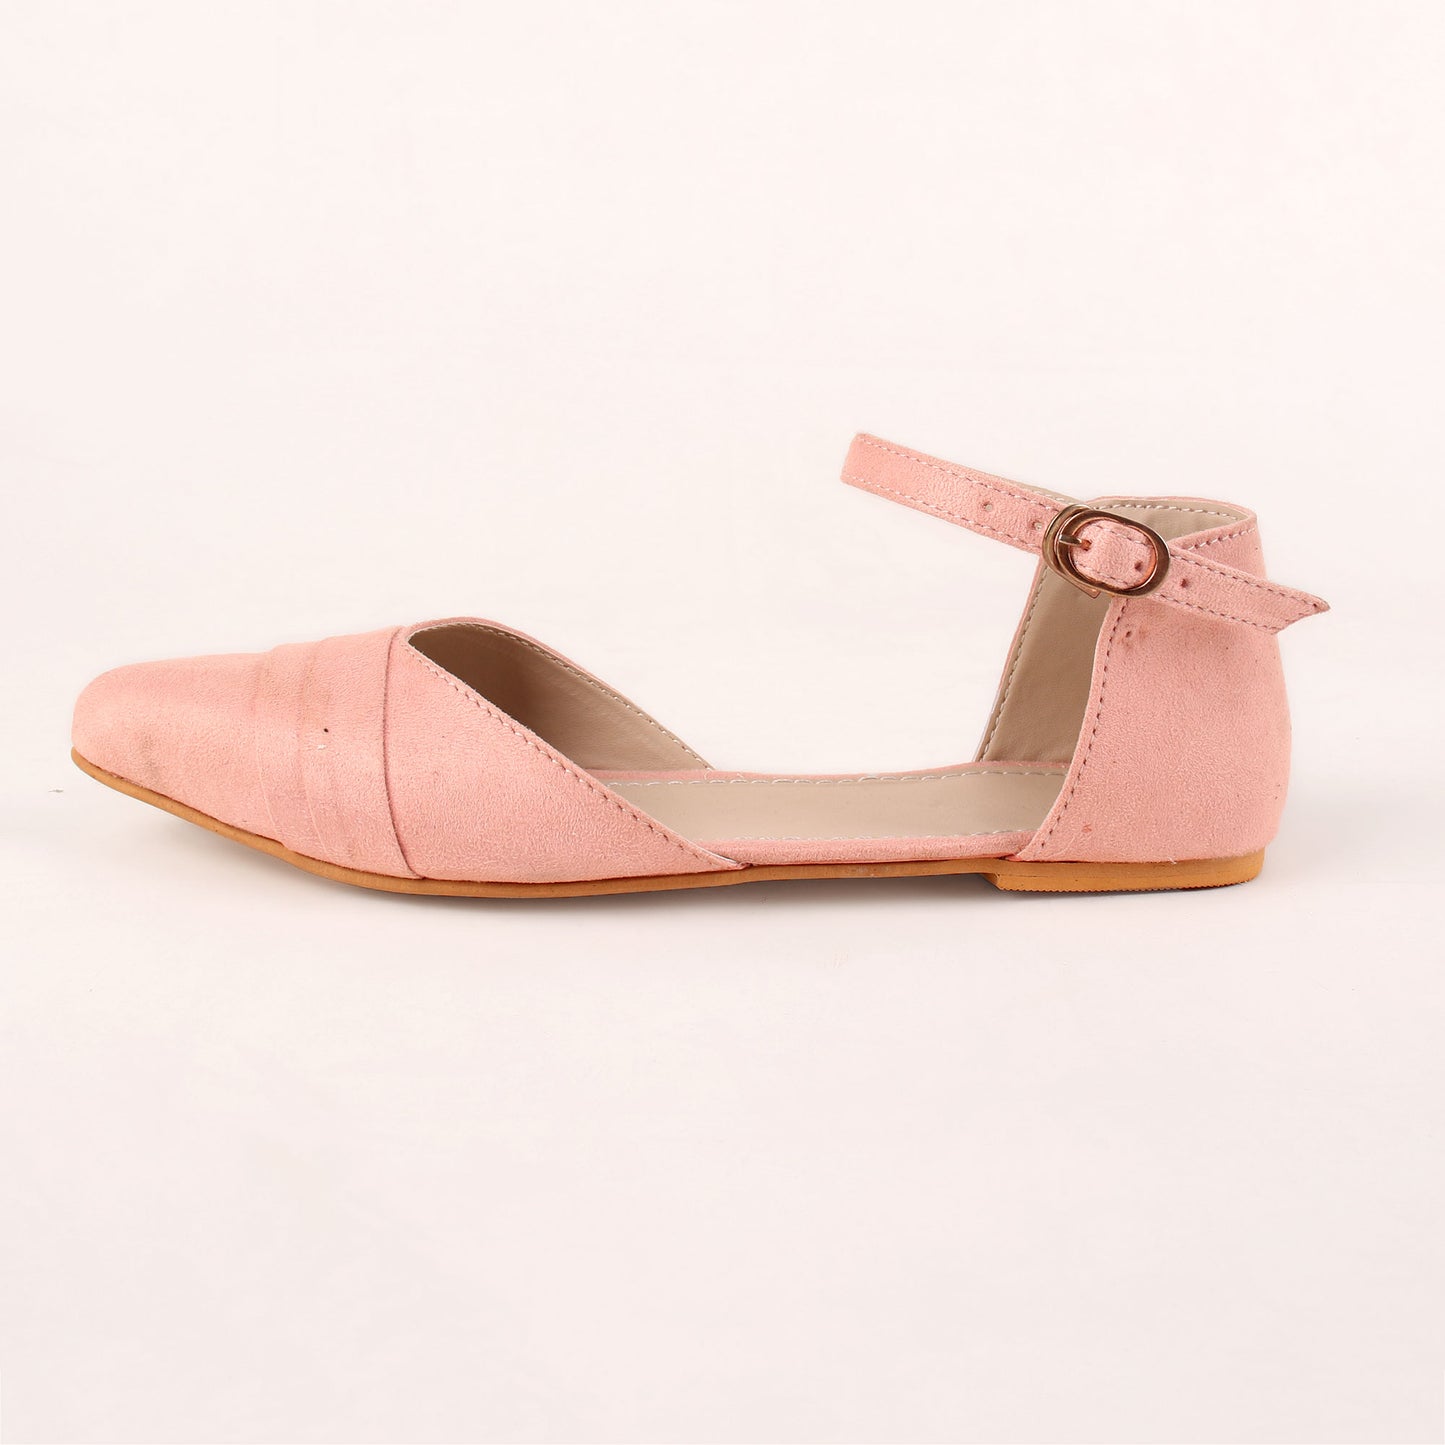 Foot Wear,The Graceful Suave Pink Flats - Cippele Multi Store